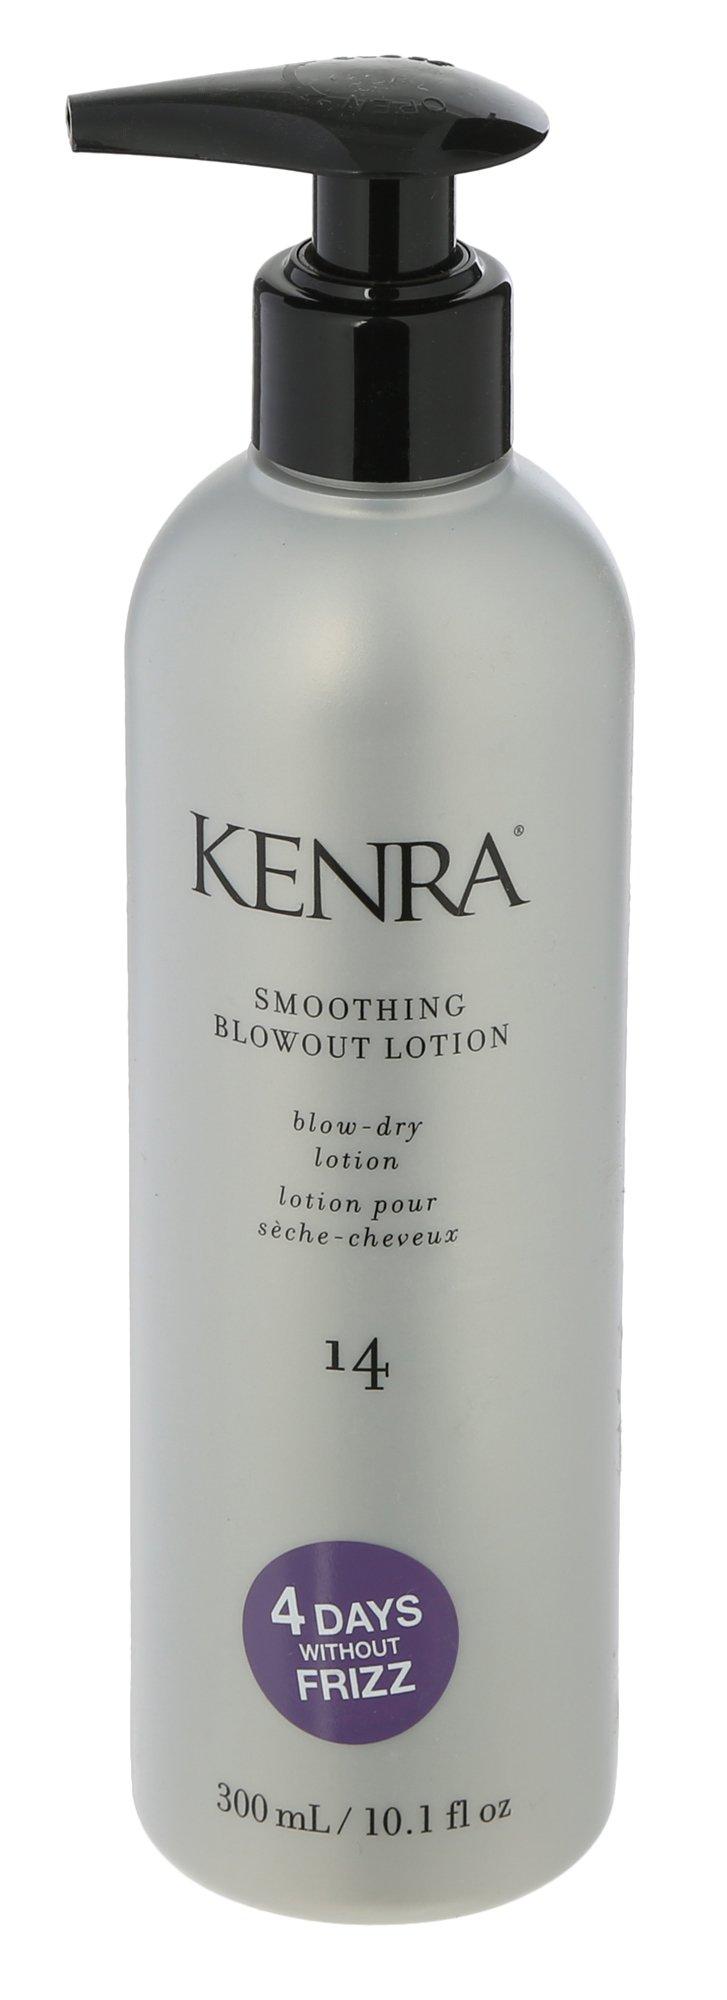 10 oz Smoothing Blowout Lotion